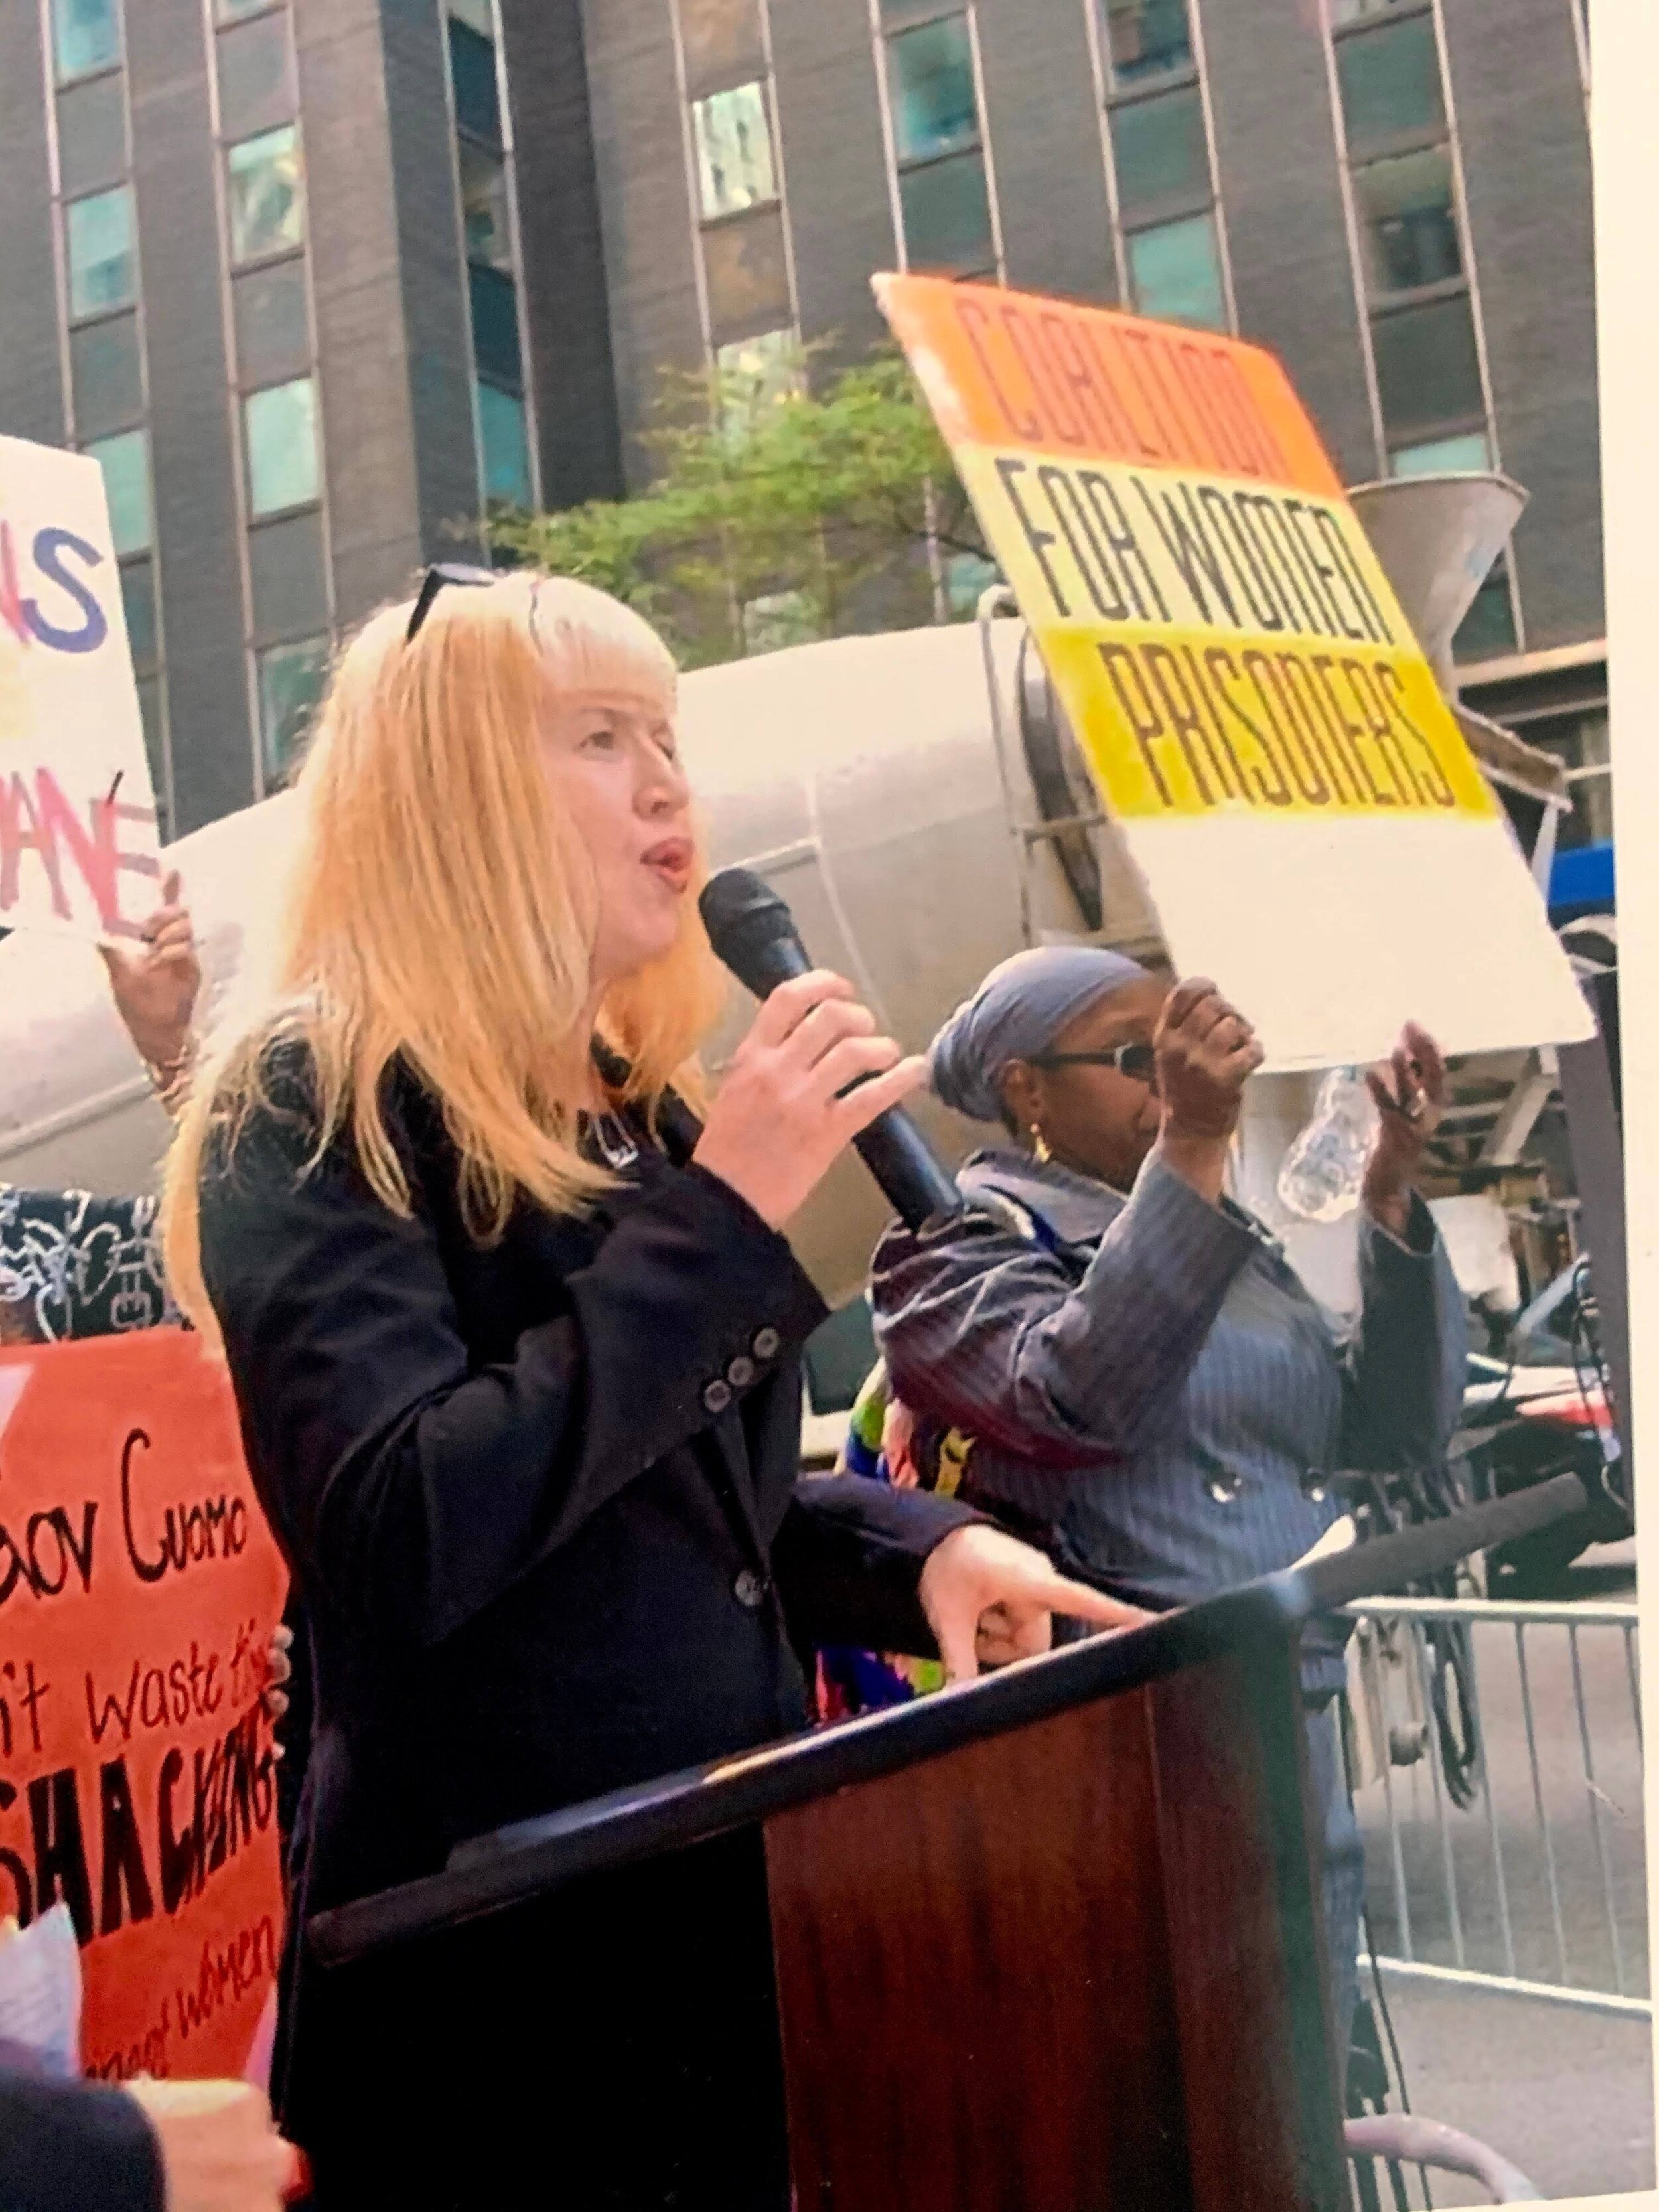 Tina speaking at a rally for the anti-shackling bill